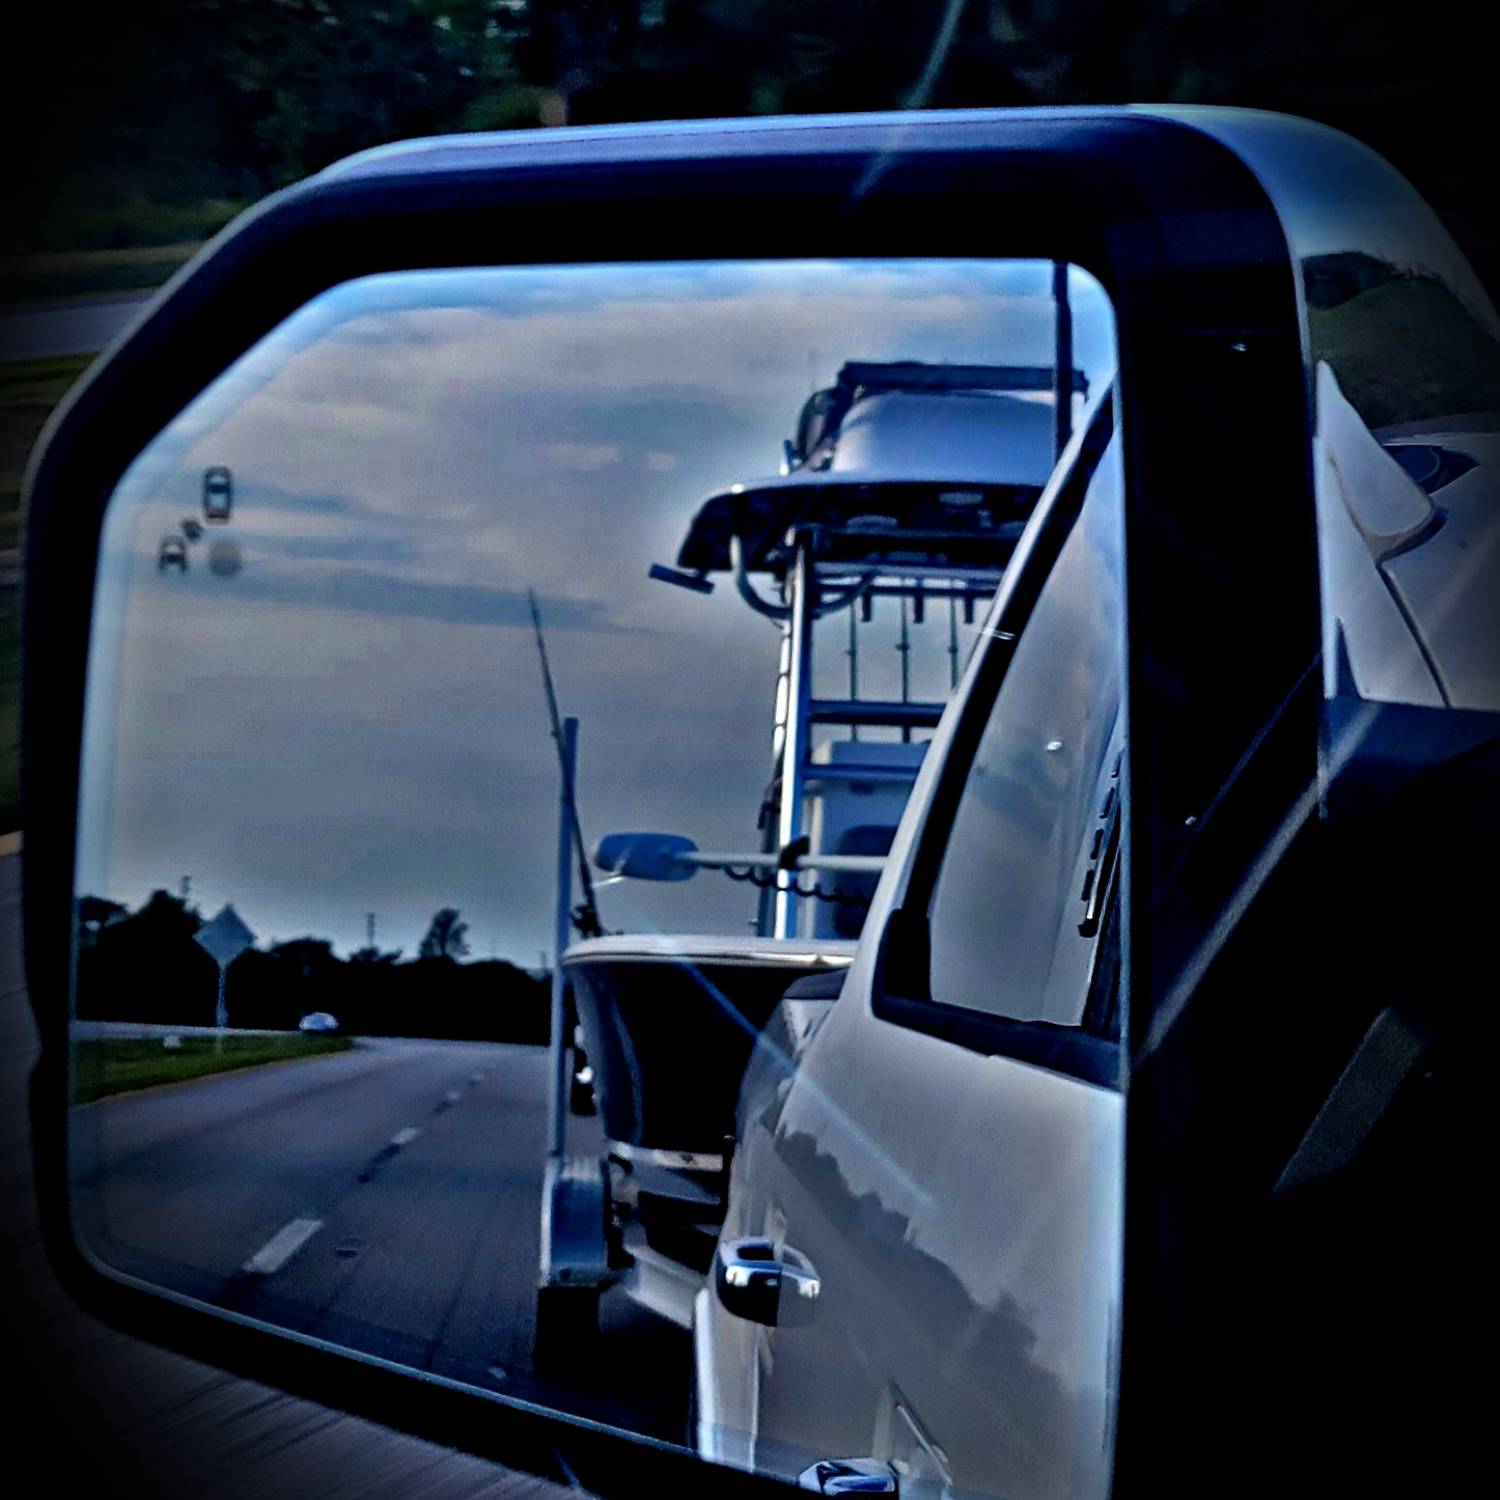 Title: Hard to keep my eyes on the road with this beauty in the mirror. - On board their Sportsman Masters 247 Bay Boat - Location: Lake Placid Fl. Participating in the Photo Contest #SportsmanJuly